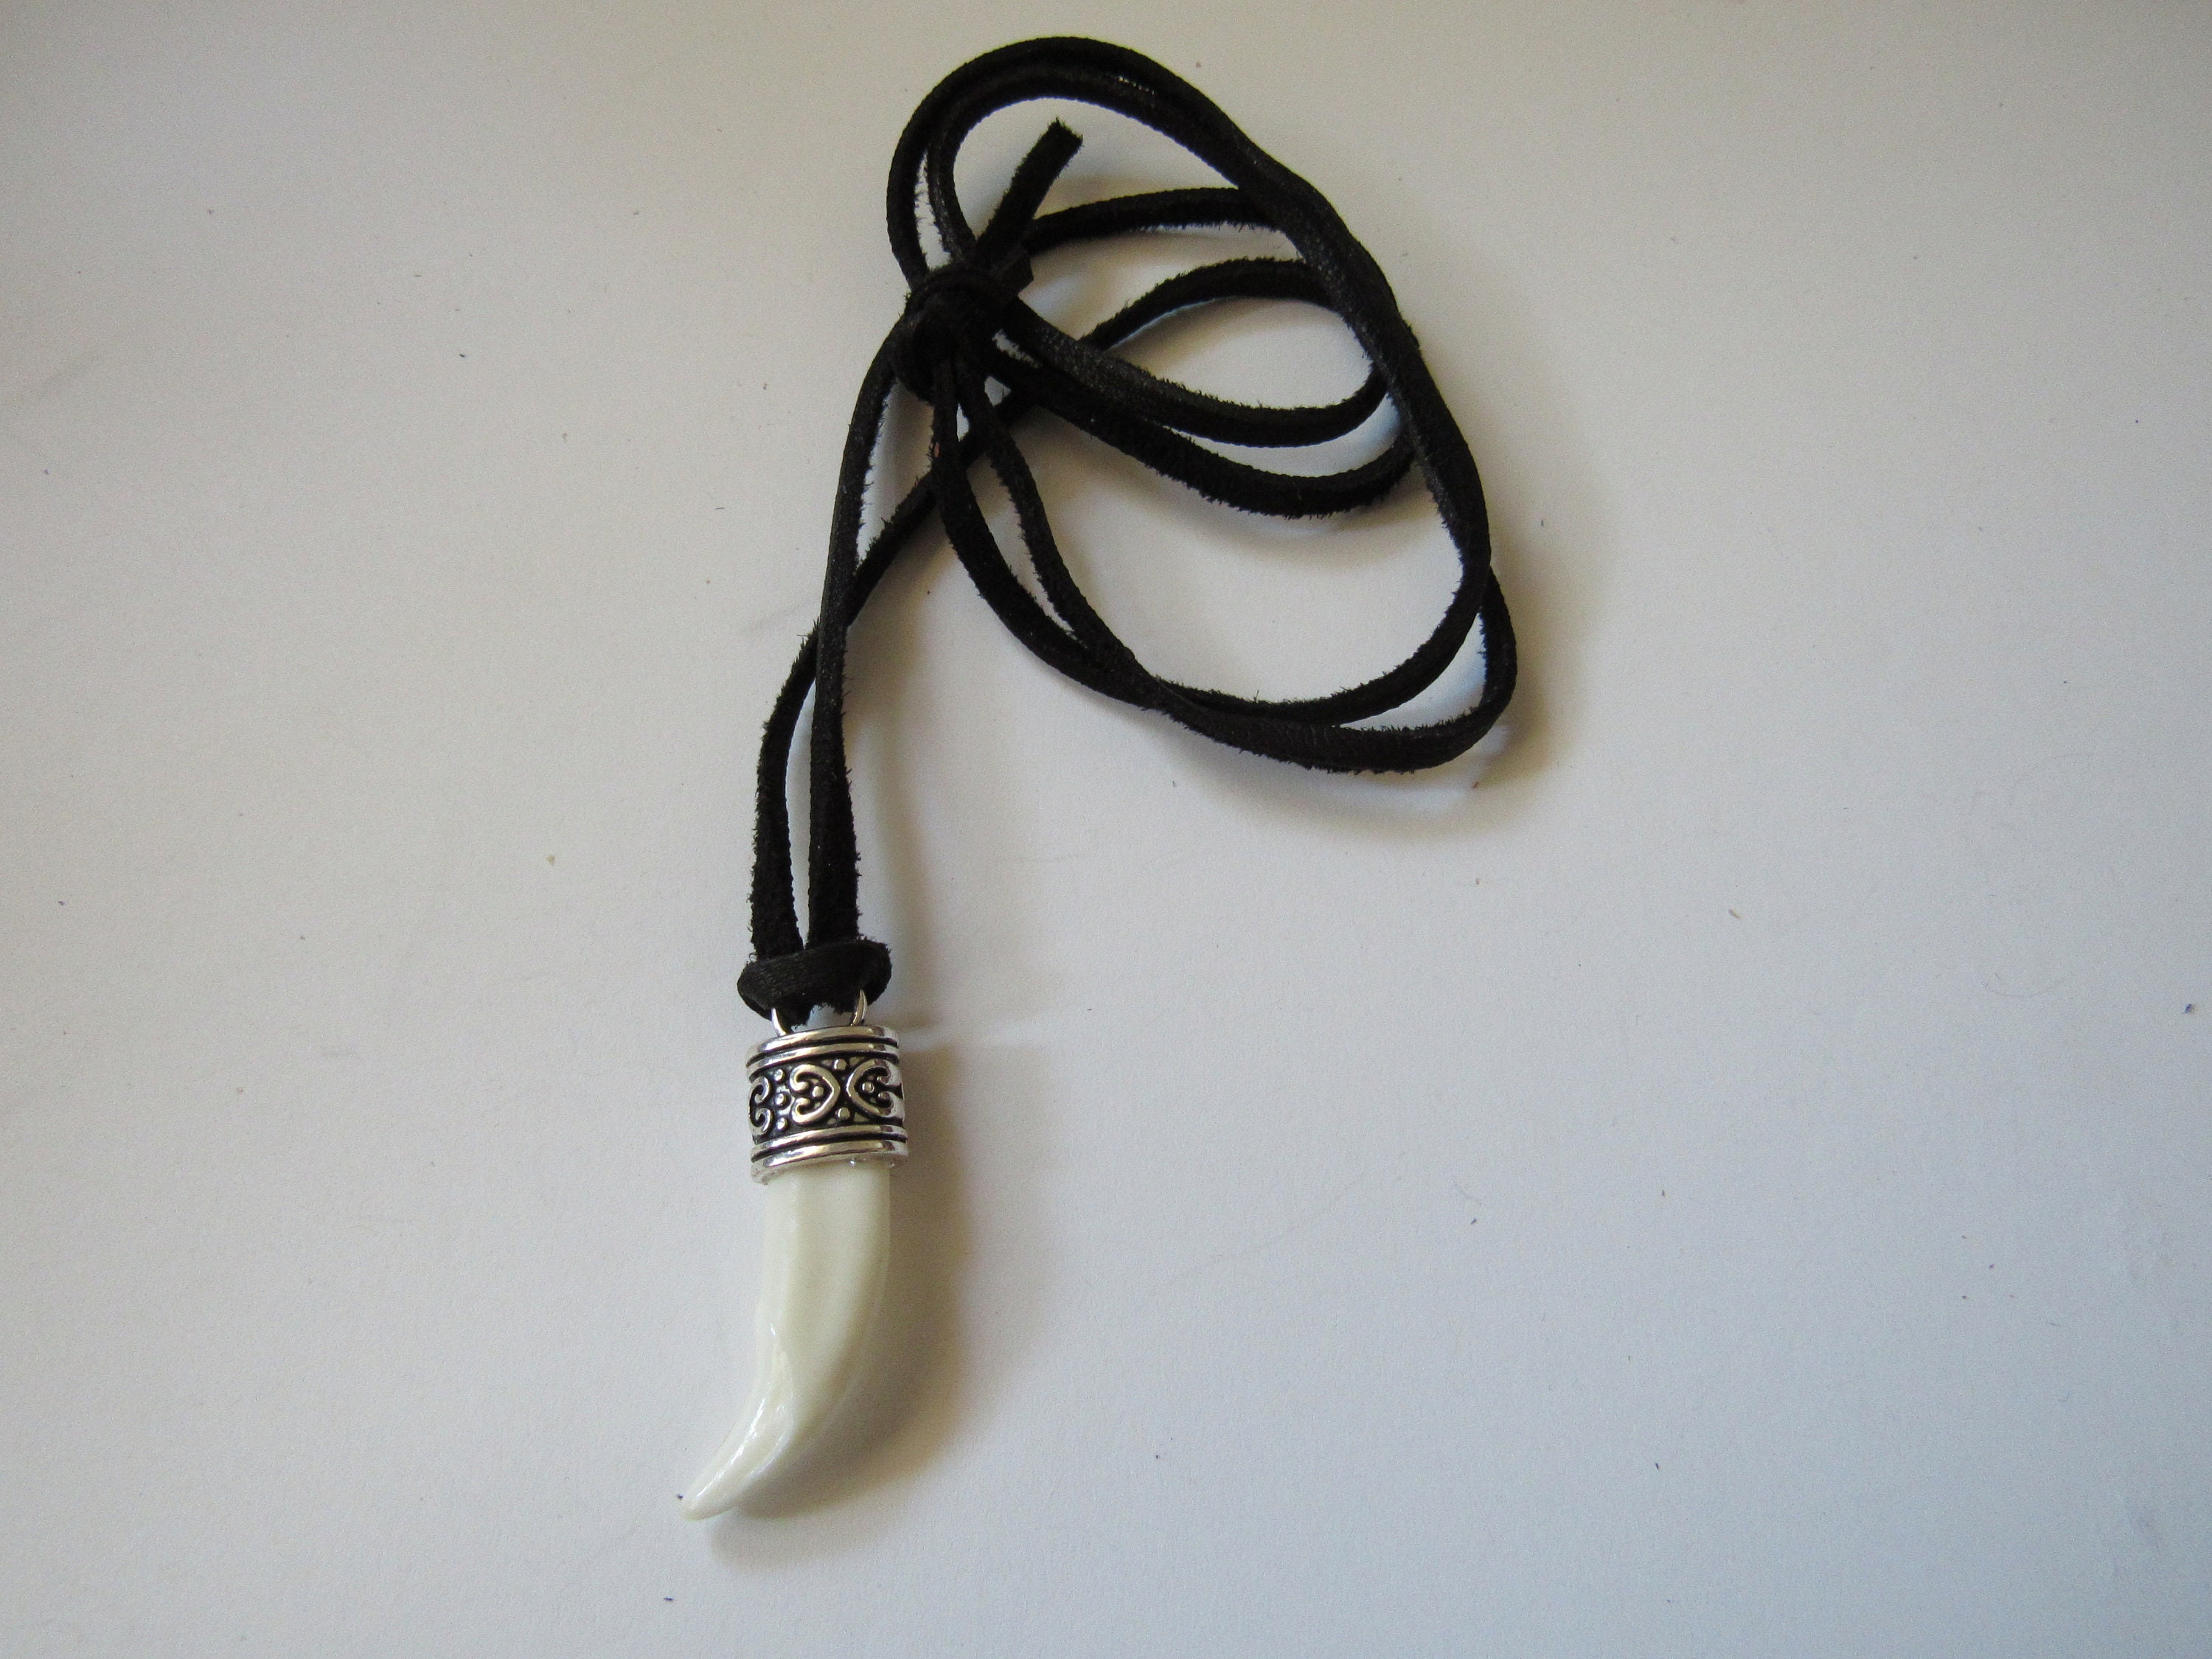 1 White Coyote Tooth Necklace REAL Teeth Bone Beads Shark Cartilage 16"-28" NEW!